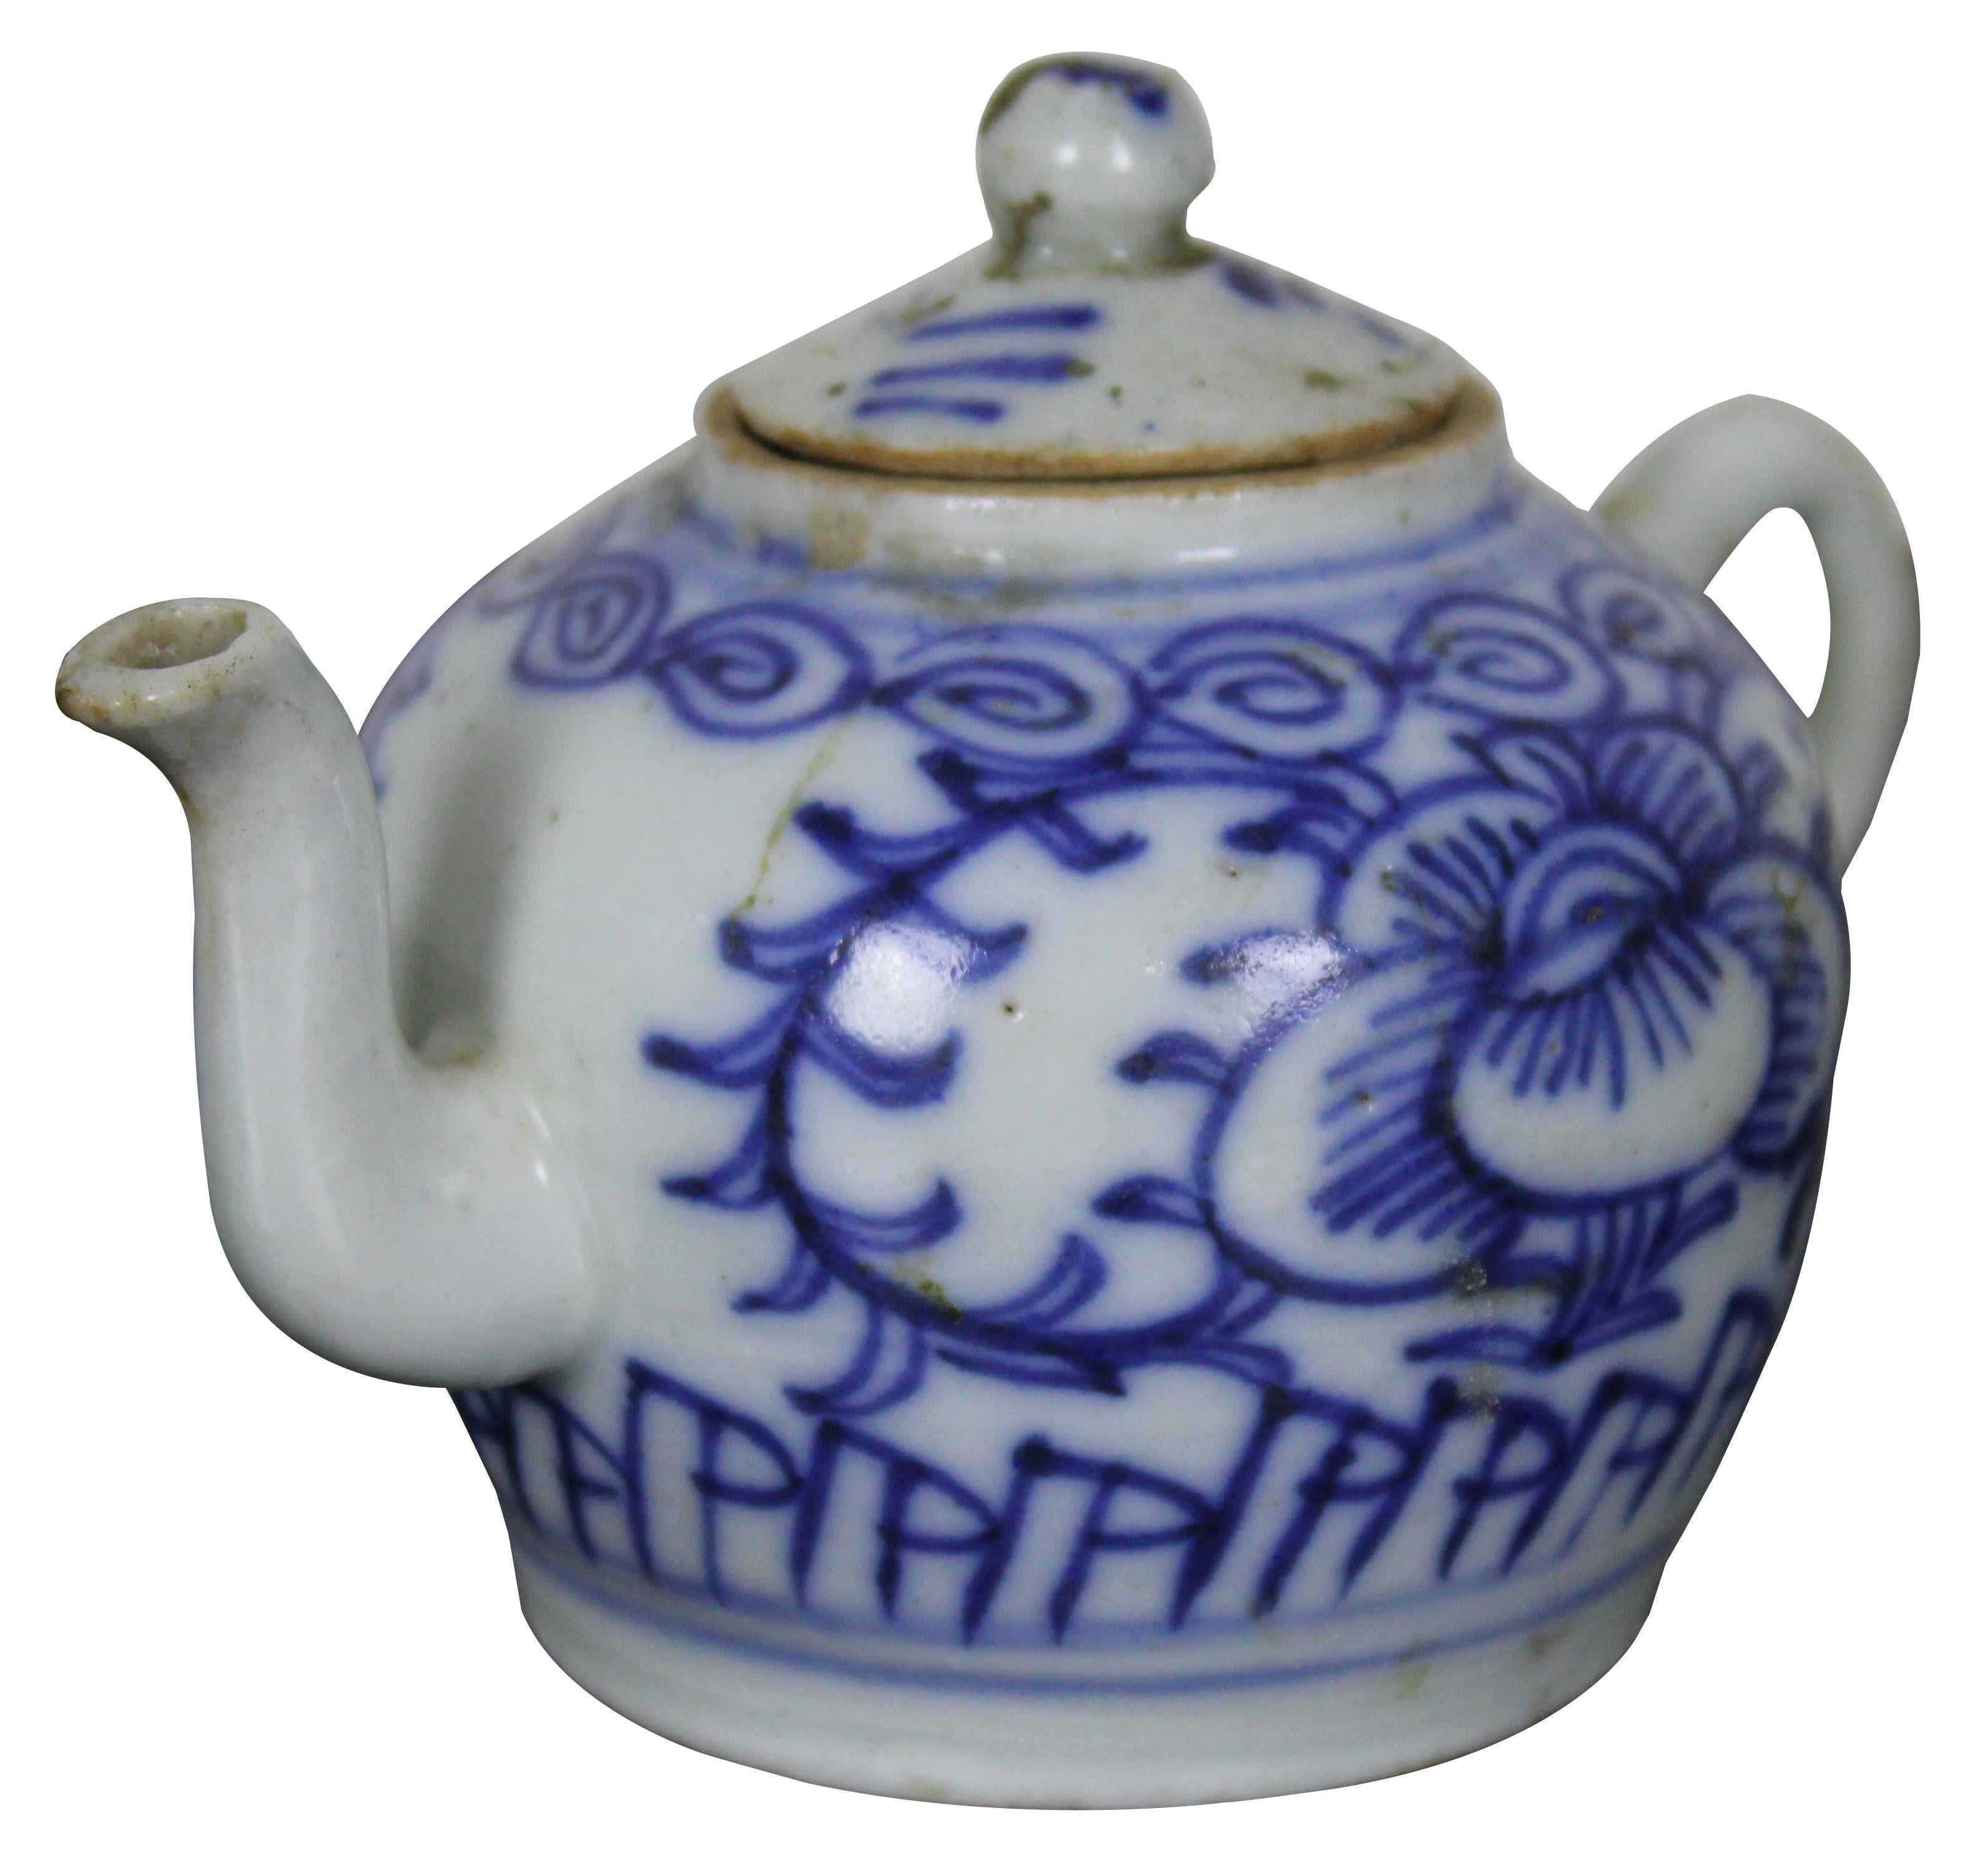 Antique 18th century Chinese Qing Dynasty blue and white porcelain creamer or teapot with floral designs. Measure: 5